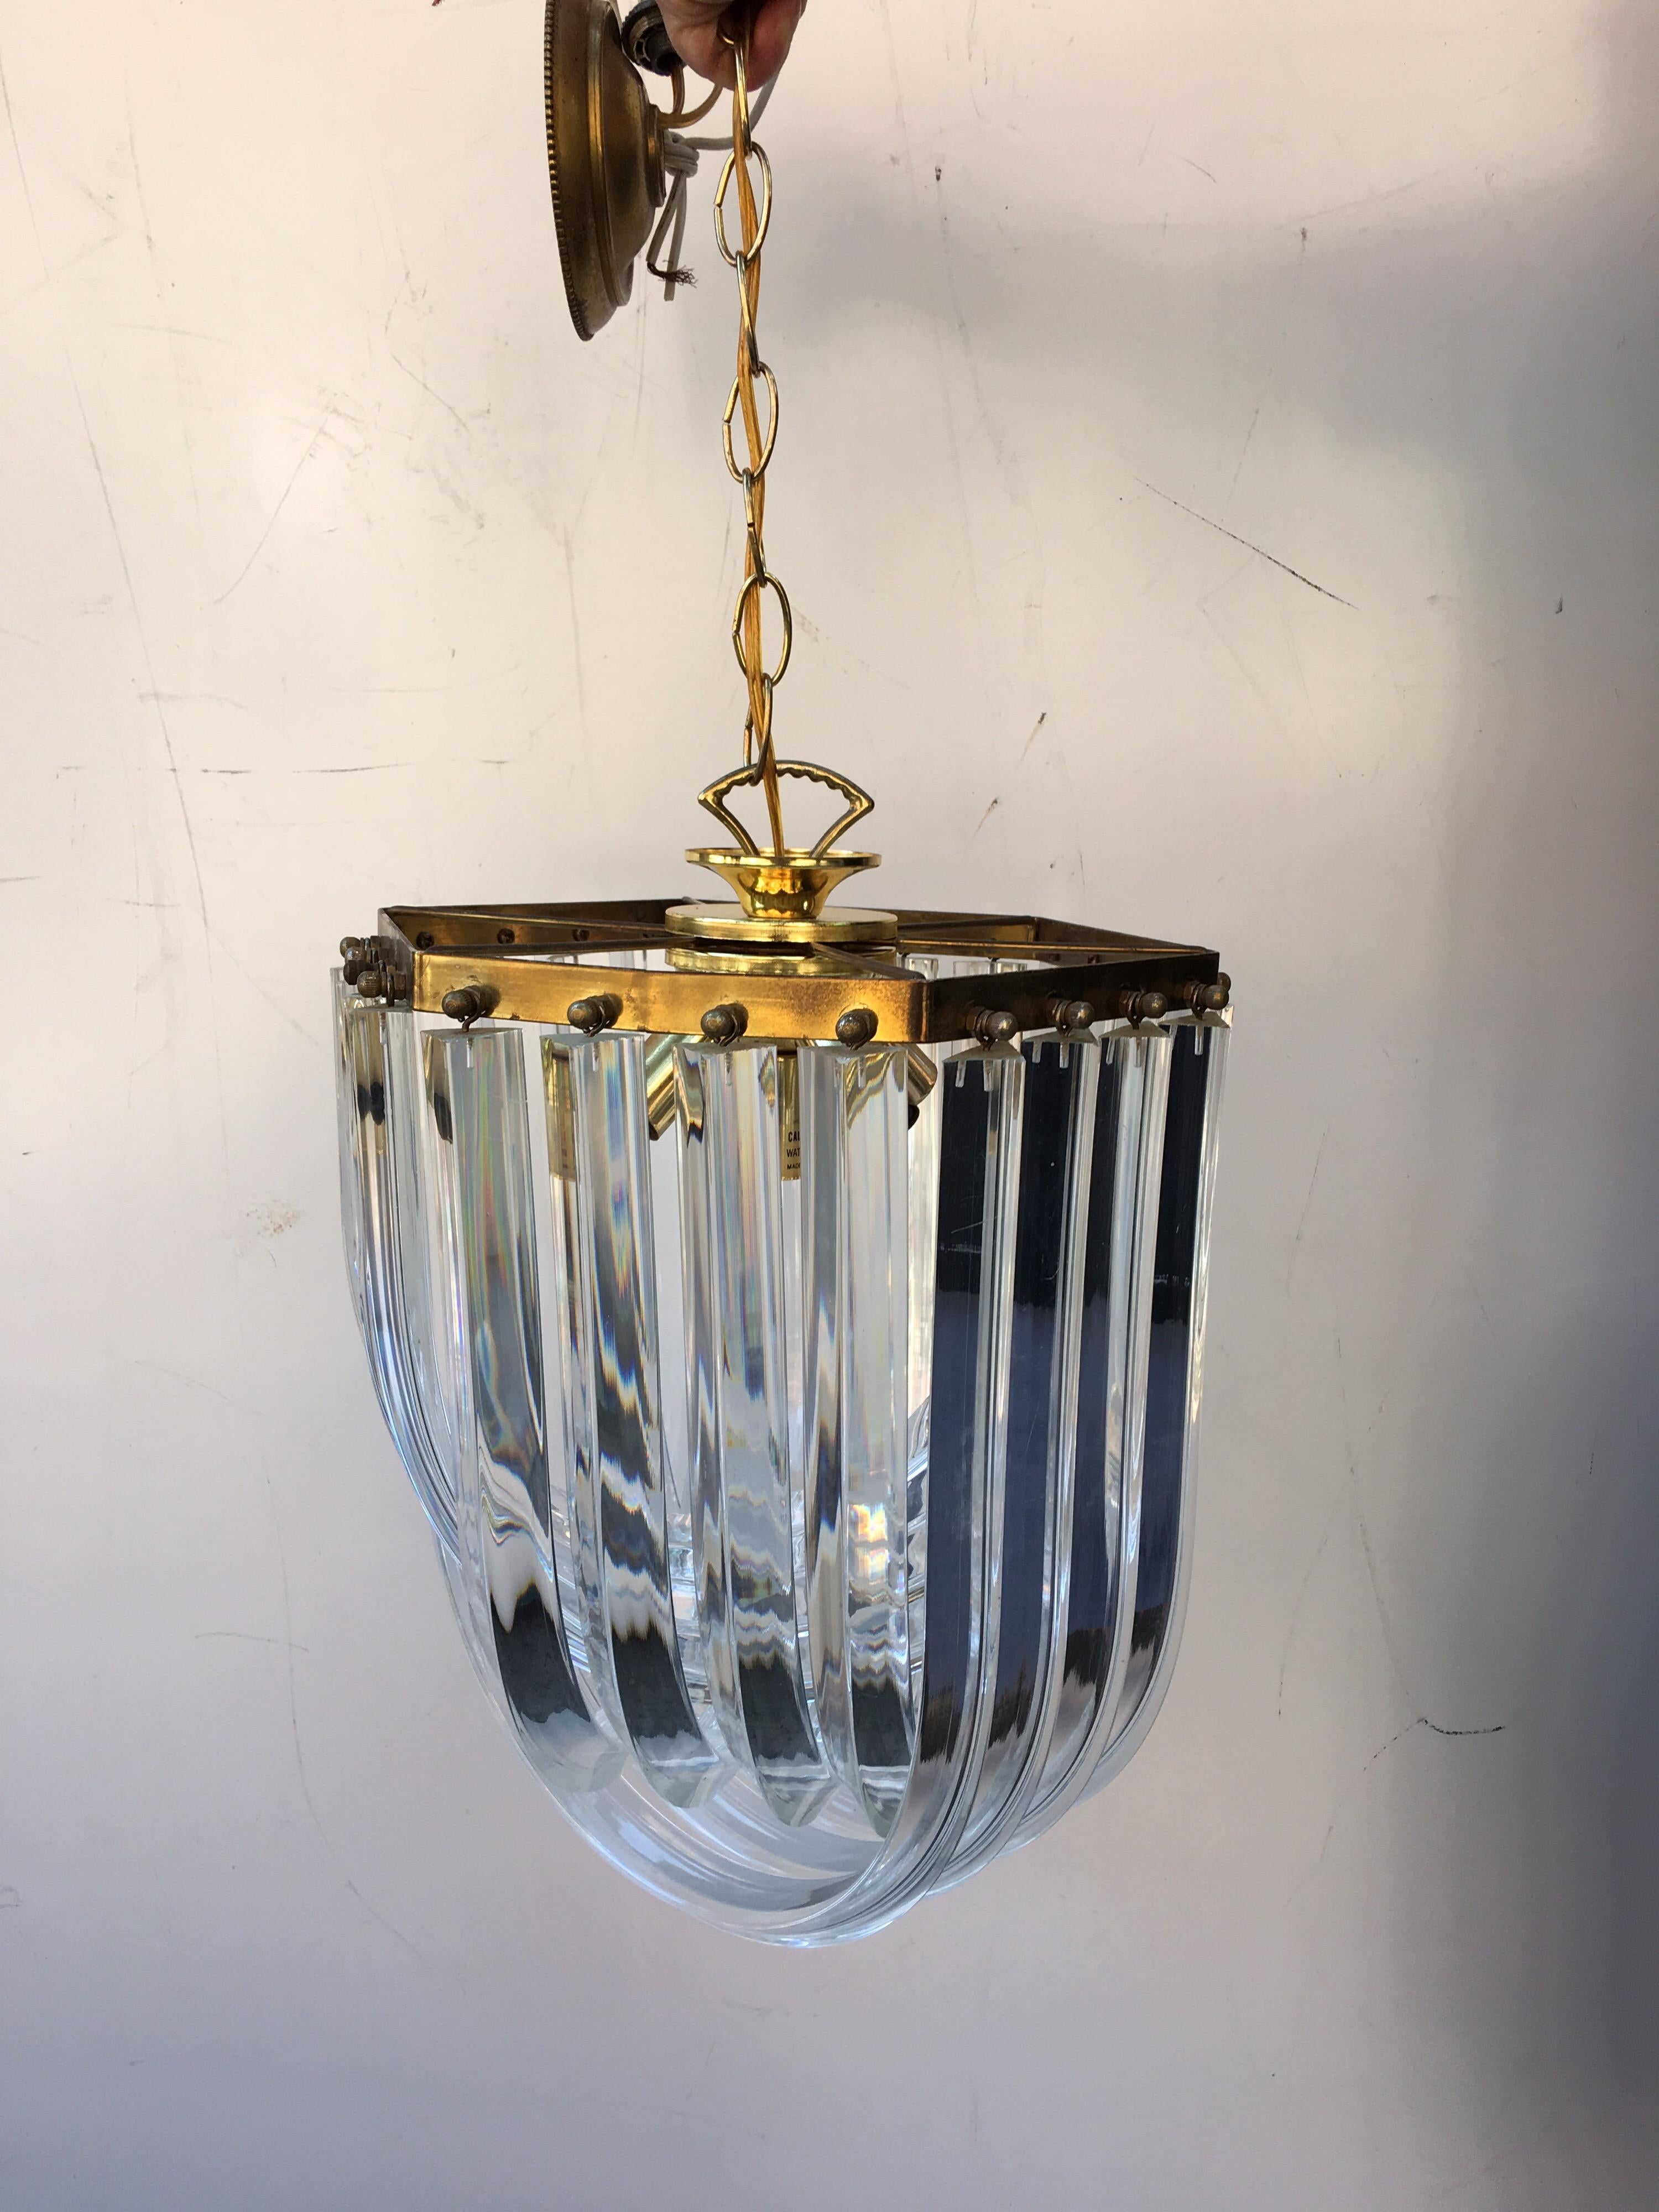 1960s-1970s cascading loop chandelier with brass trim. Comes with about a foot of chain.  2nd slightly larger version available as well!  Please inquire!  Larger one is 950.00